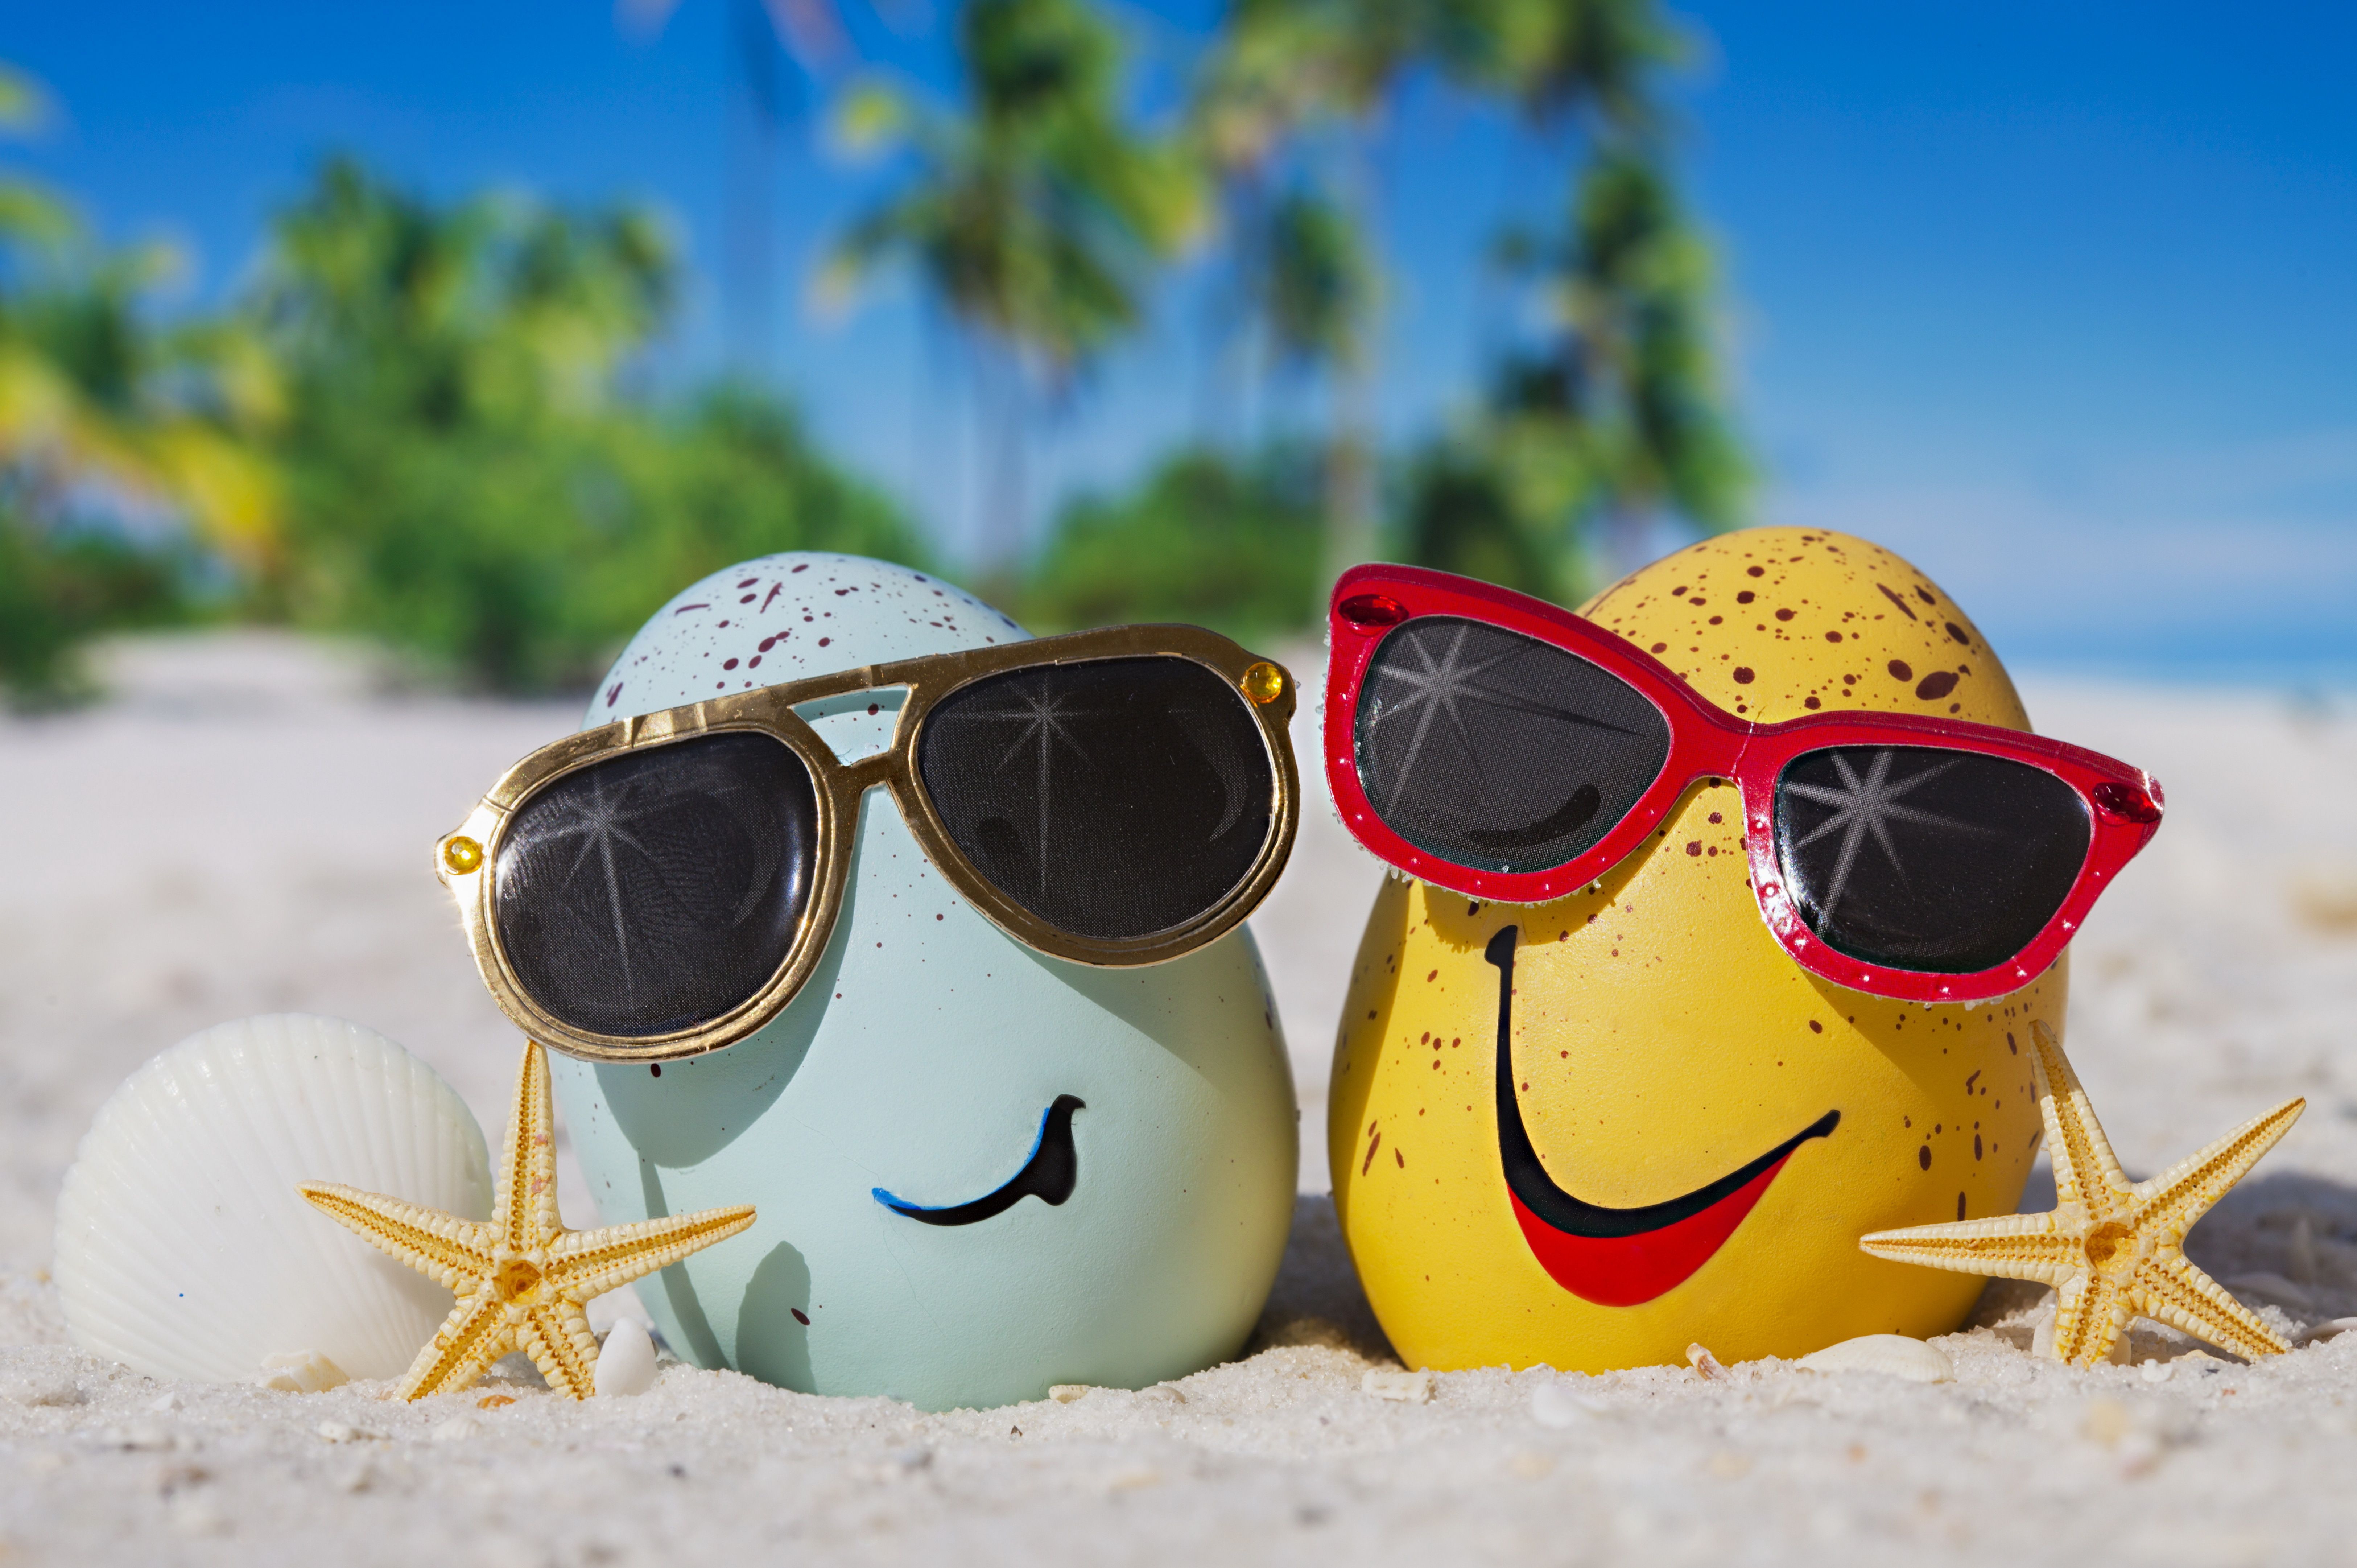 Two eggs in sunglasses on the sea sand in summer wallpaper